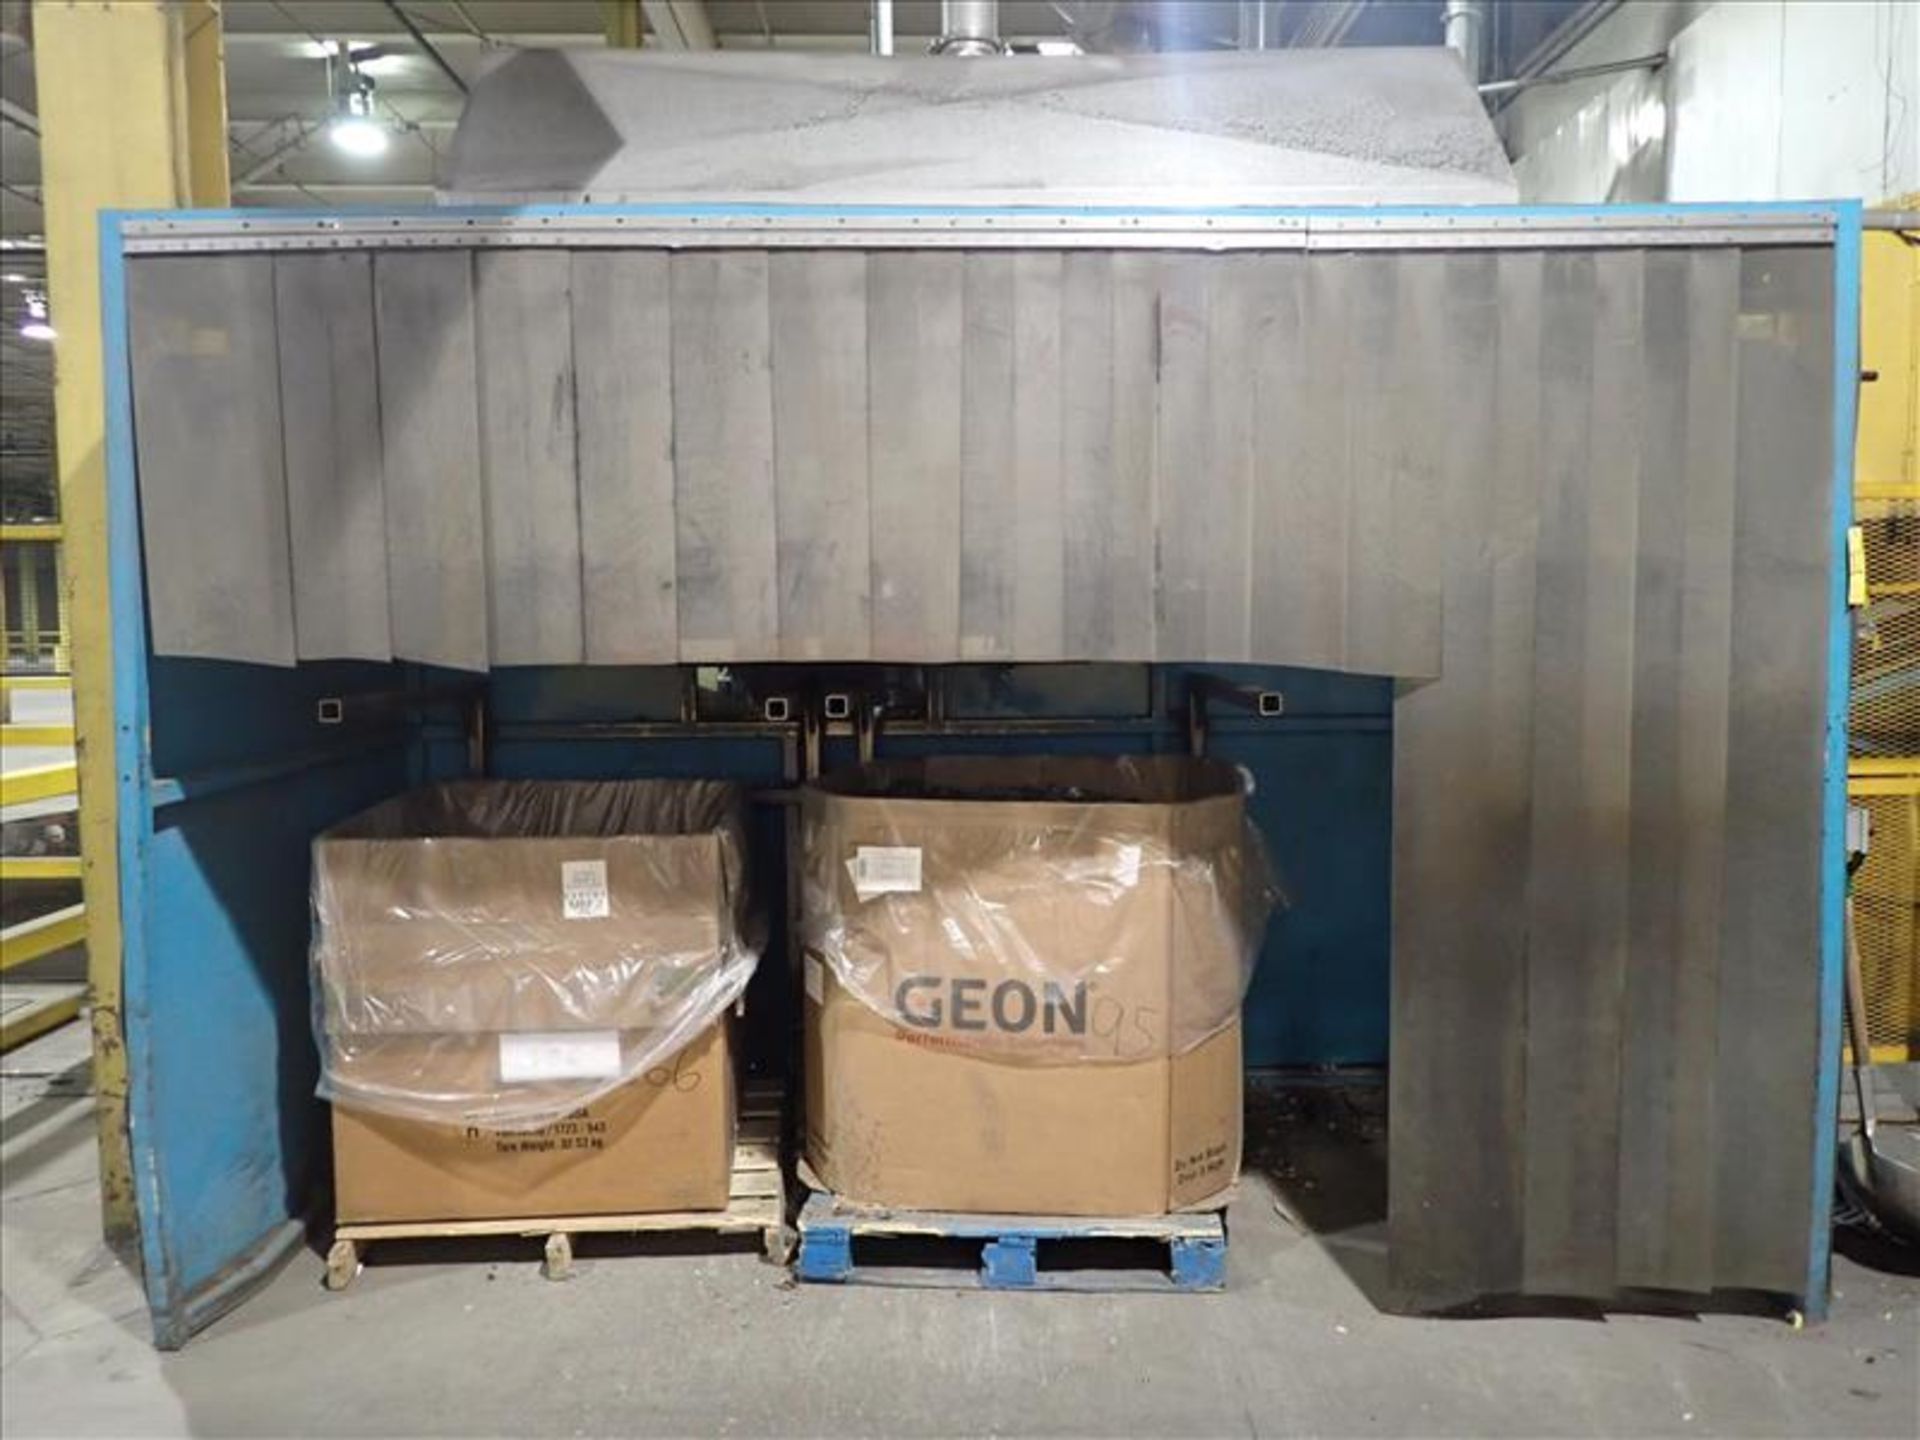 Loading Booth, approx. 5' x 12' c/w directional belt conveyor, approx. 27 inch x 4 feet (Subject